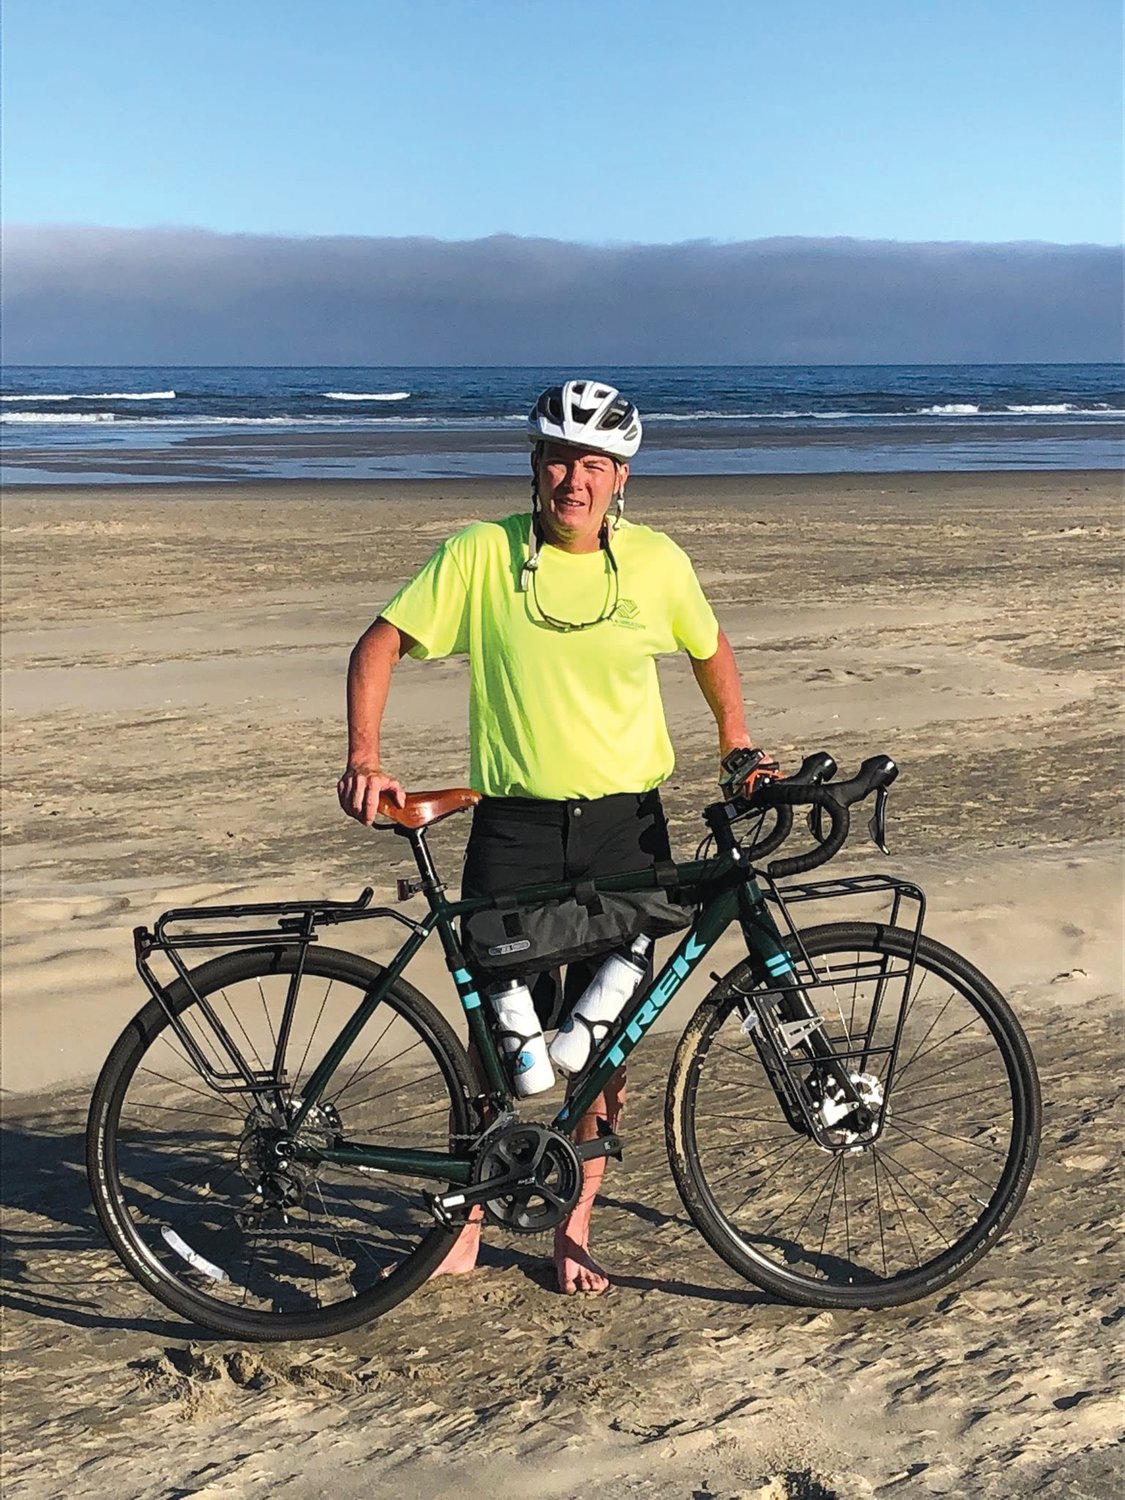 READY TO START: With the Pacific Ocean as a backdrop, Judy Davis and the bike she pedaled from Oregon to Rhode Island.